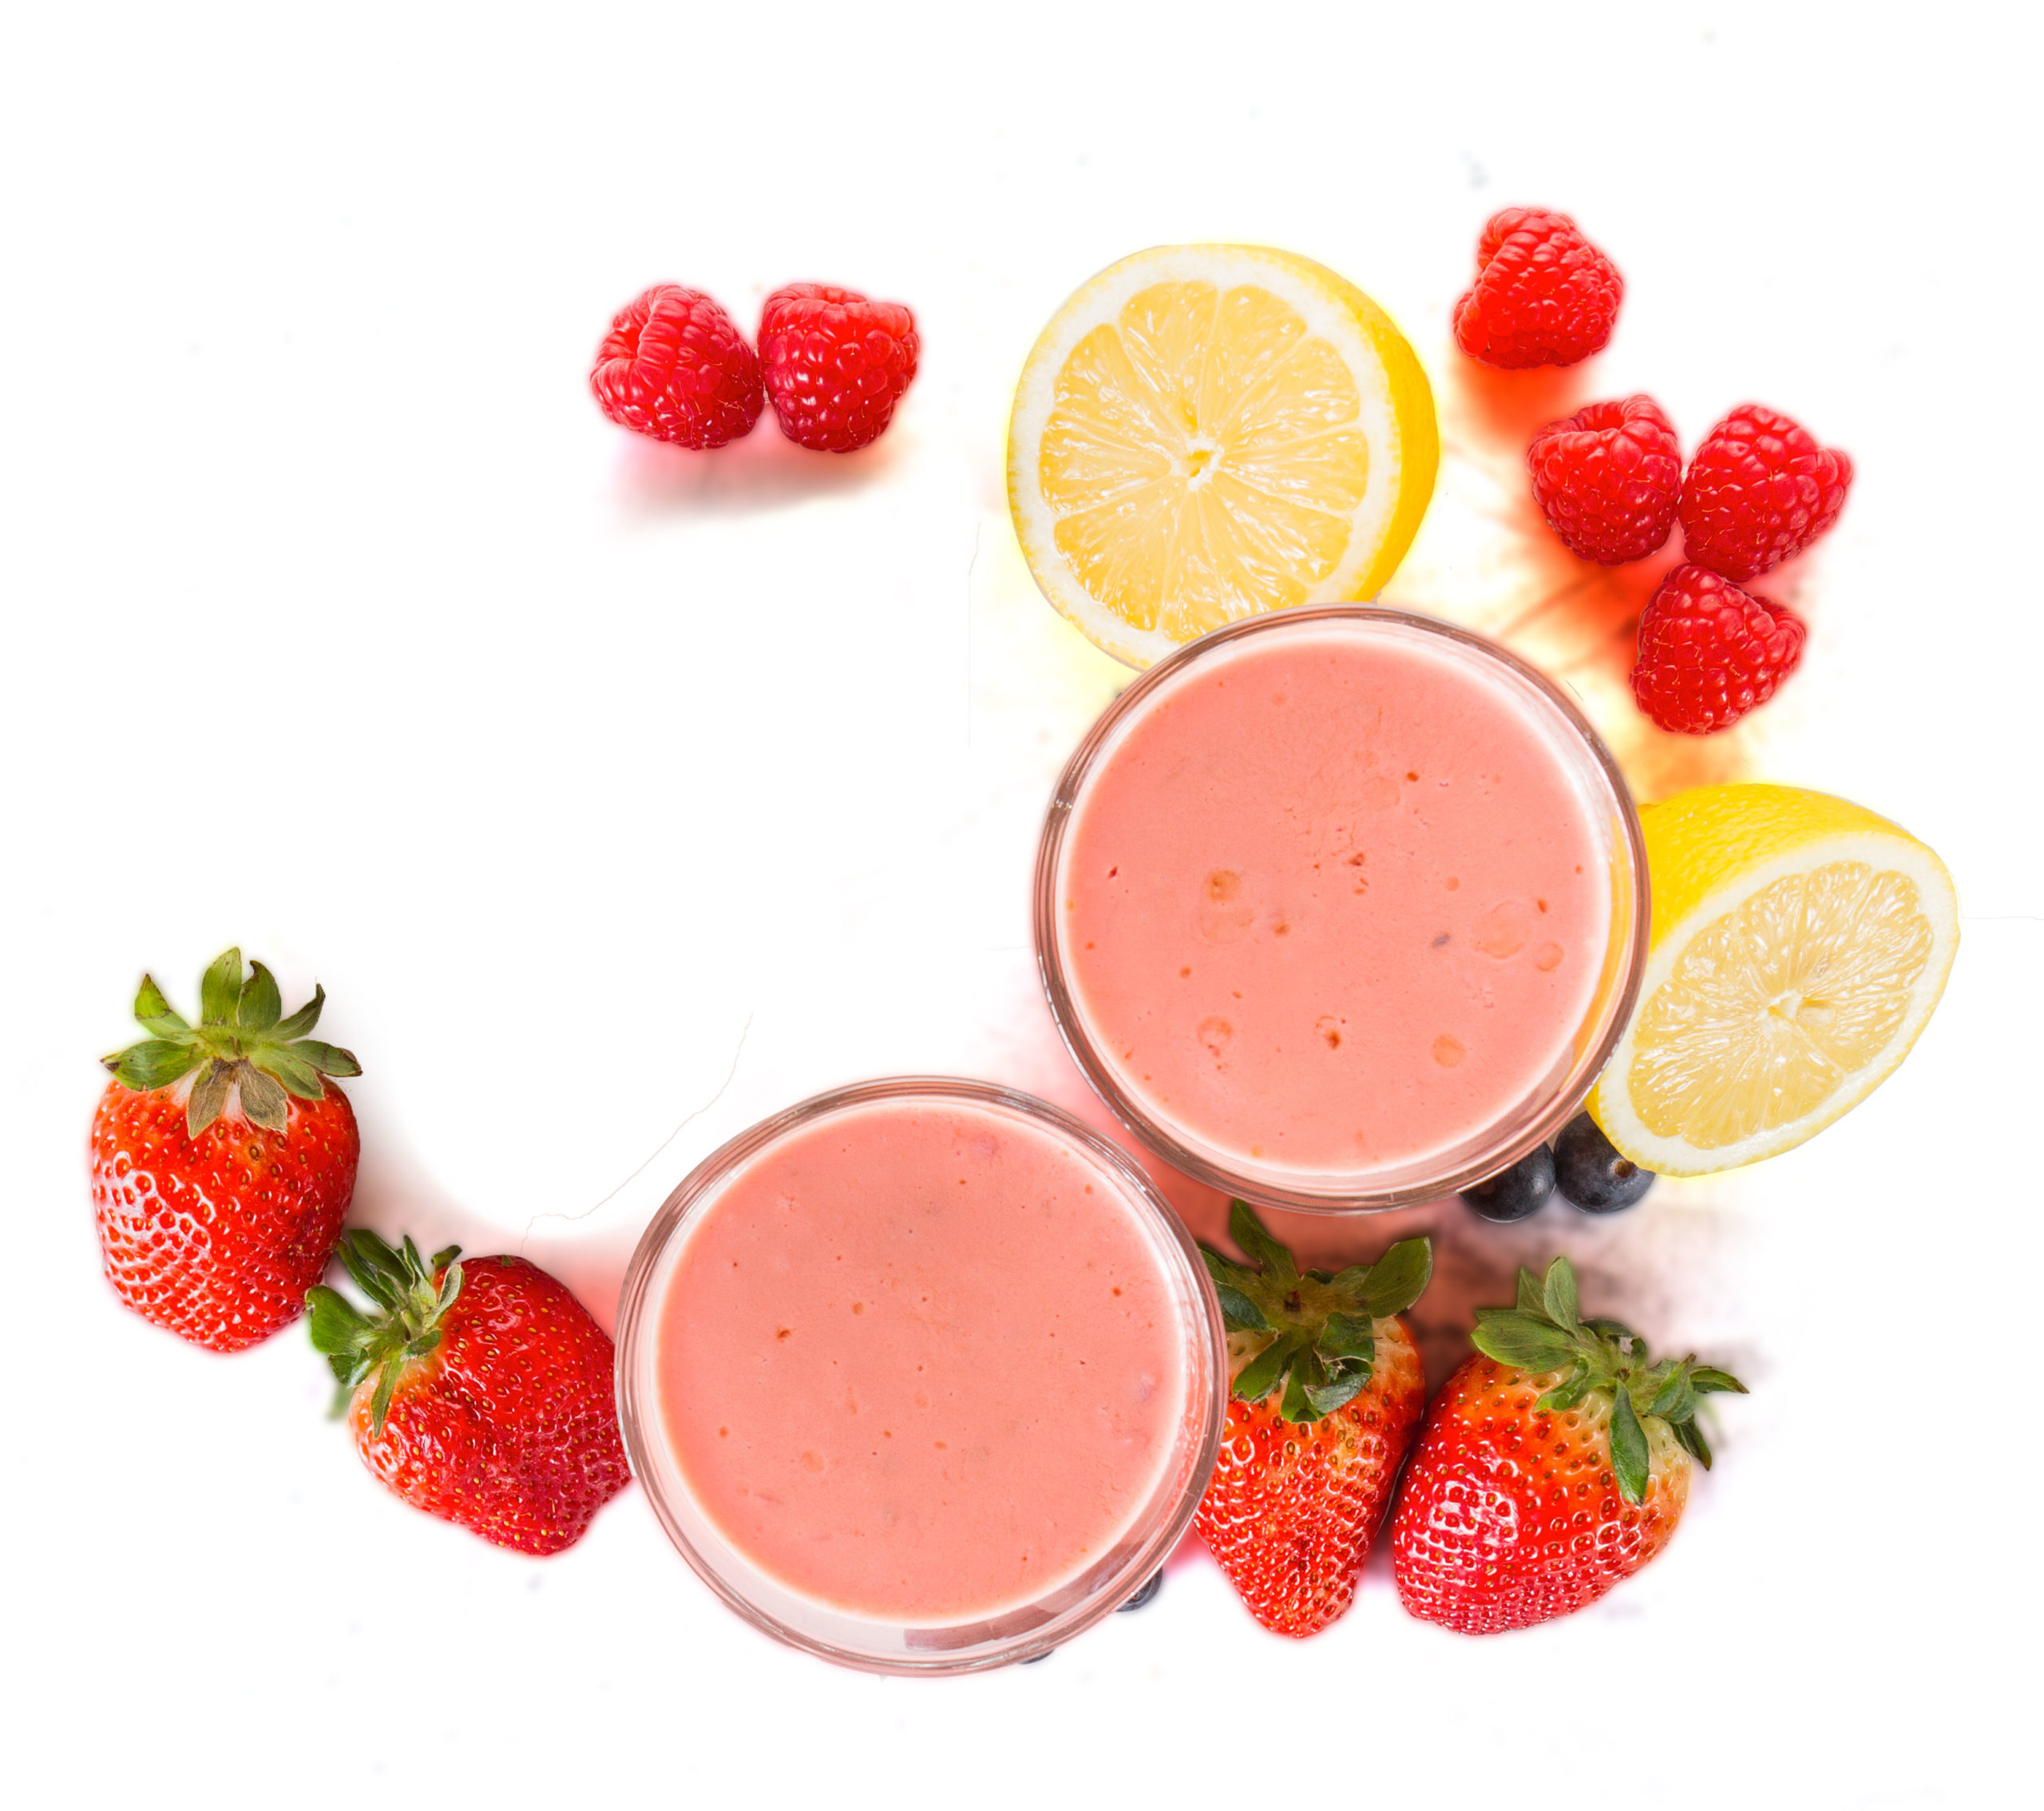 https://caferestaurant-tetedor.com/wp-content/uploads/2021/05/two-red-smoothies-with-strawberries-and-ginger-scaled.jpg